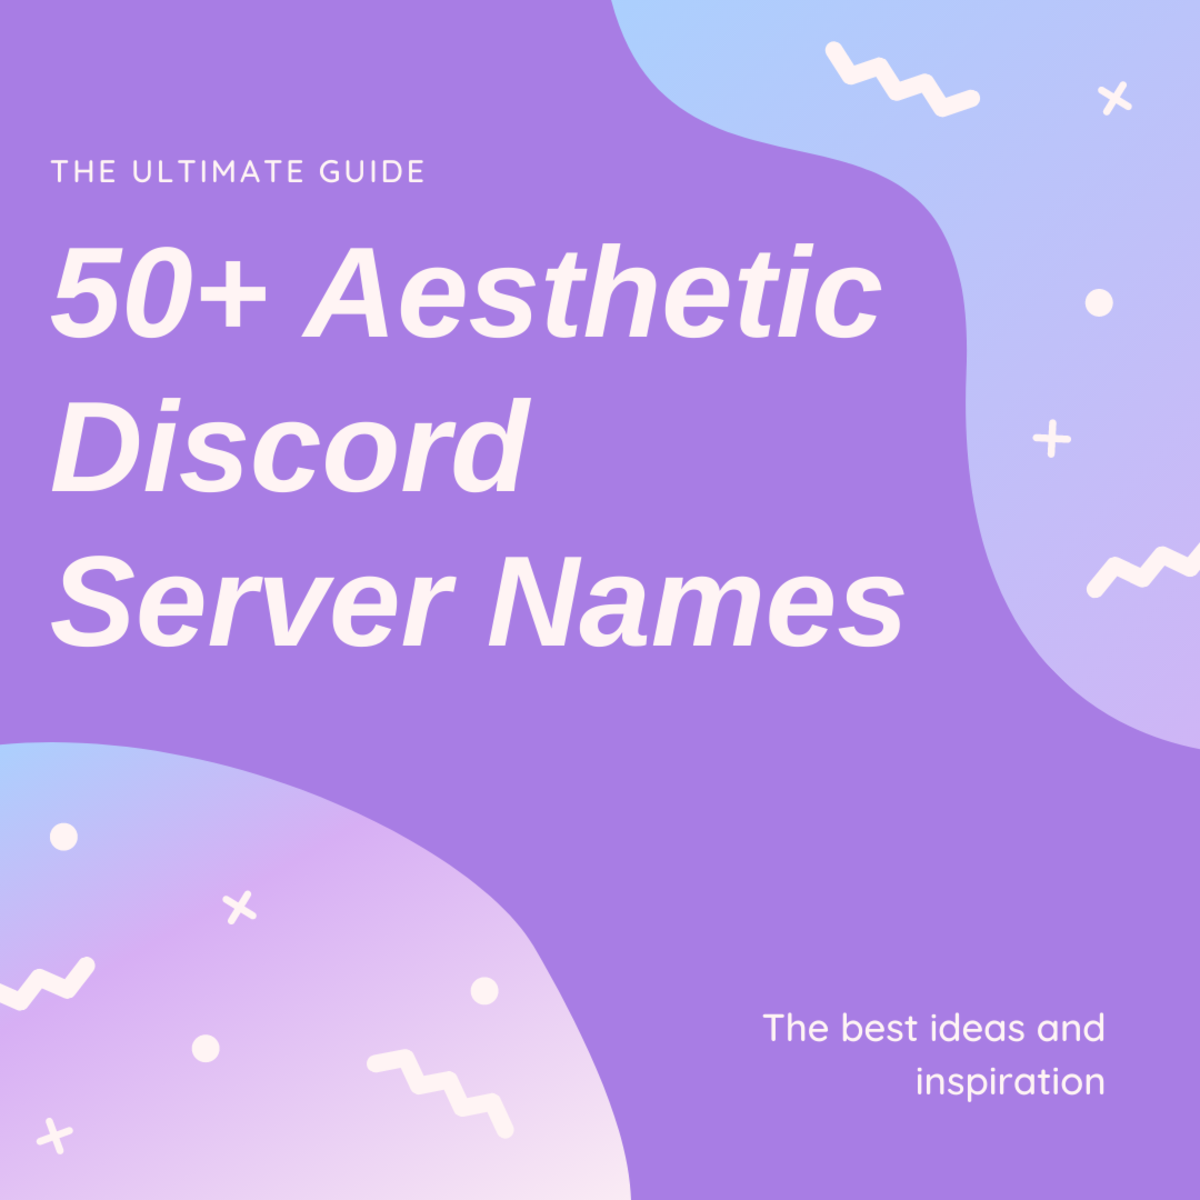 50+ Aesthetic Discord Server Names: The Ultimate List